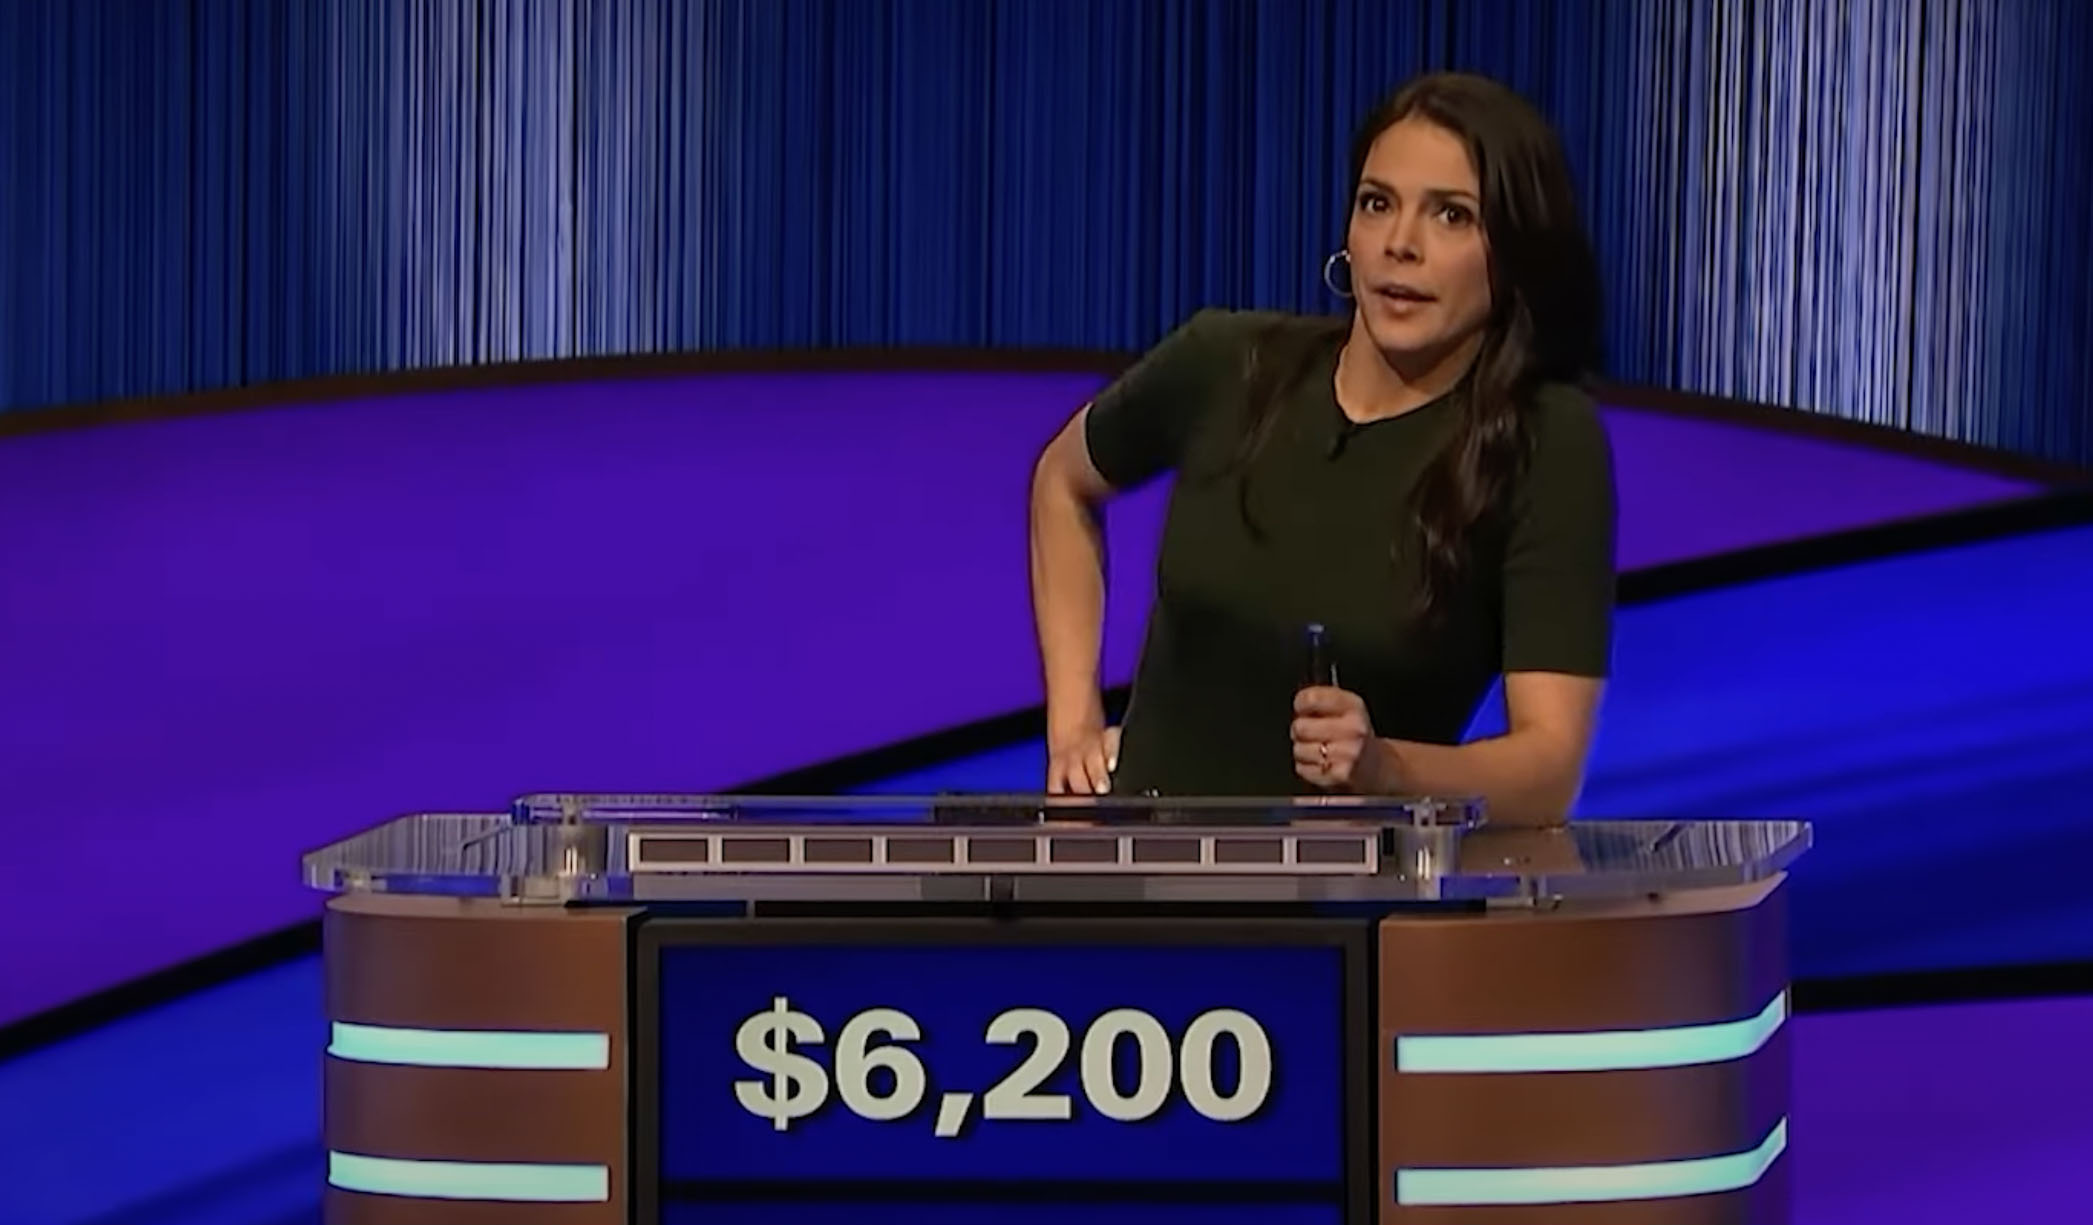 Nolan also claimed that Weber's behavior led to her 'obituaries' joke- which Jeopardy! fans most definitely did see